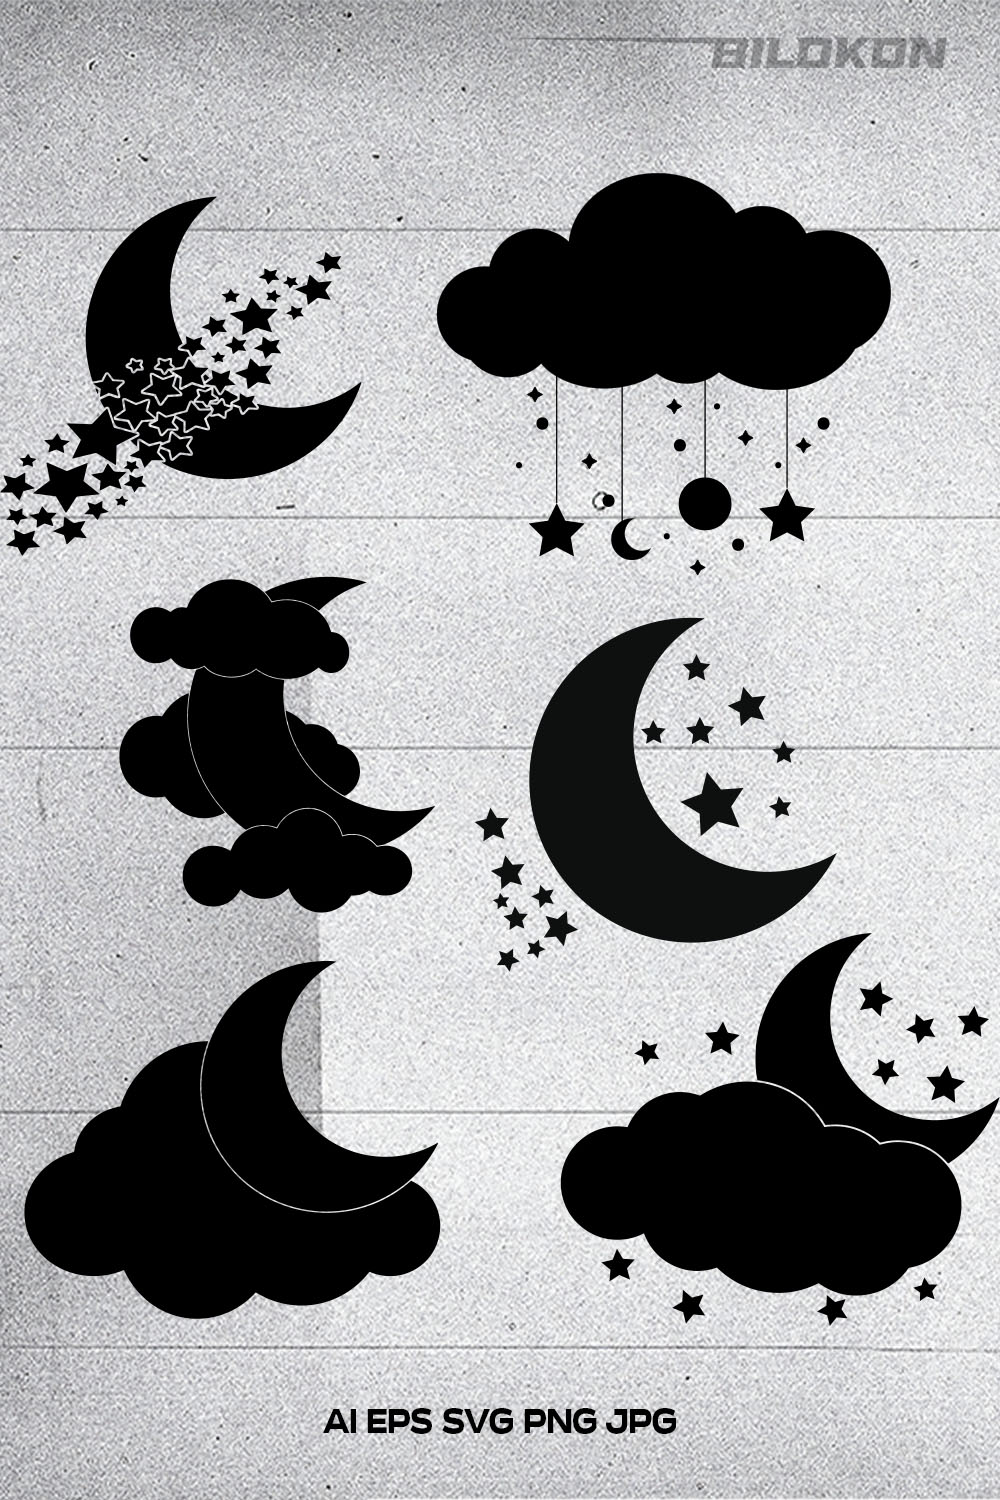 Moon, Clouds and Stars Itsons, Dreams Symbol, SVG Vector - Pinterest.